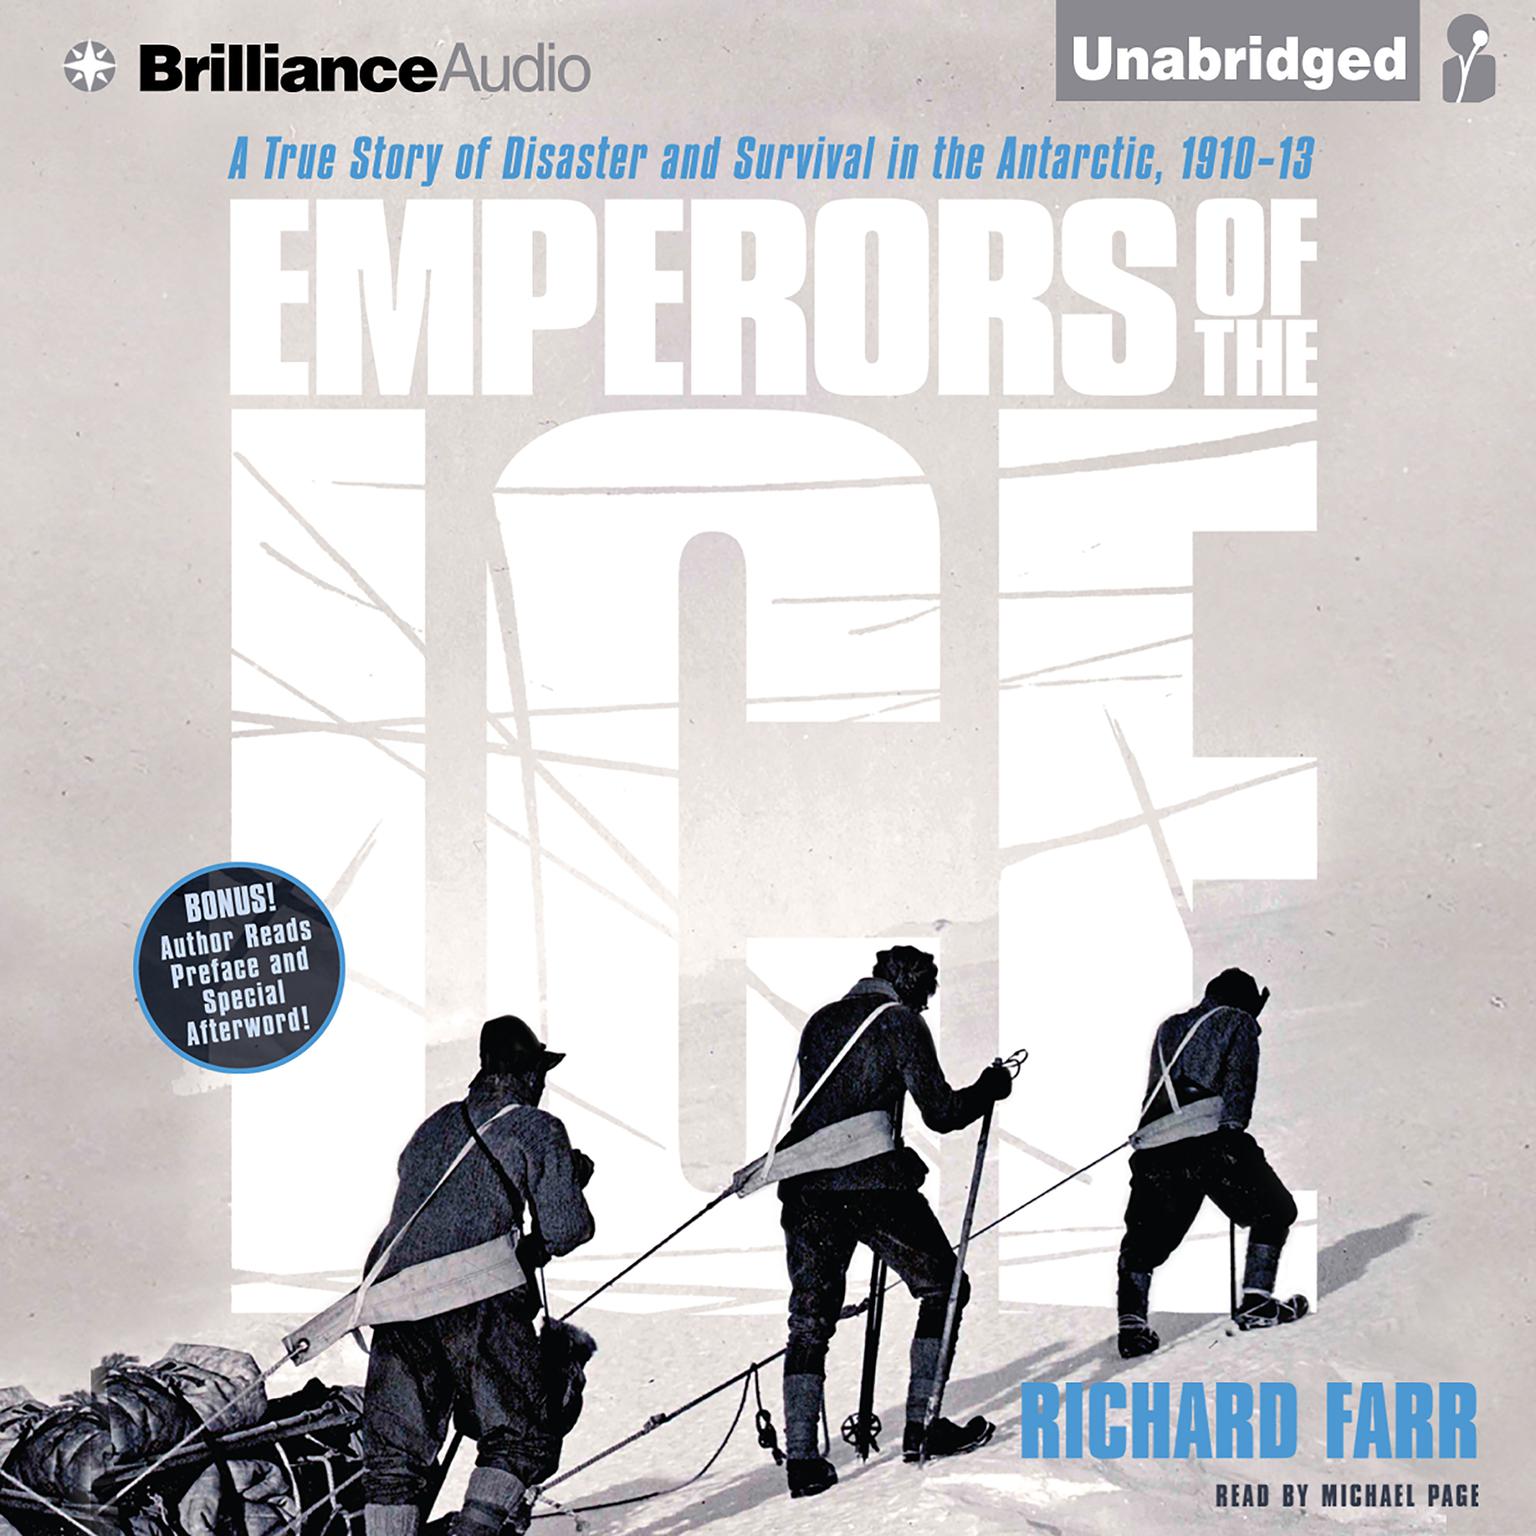 Emperors of the Ice: A True Story of Disaster and Survival in the Antarctic, 1910-13 Audiobook, by Richard Farr